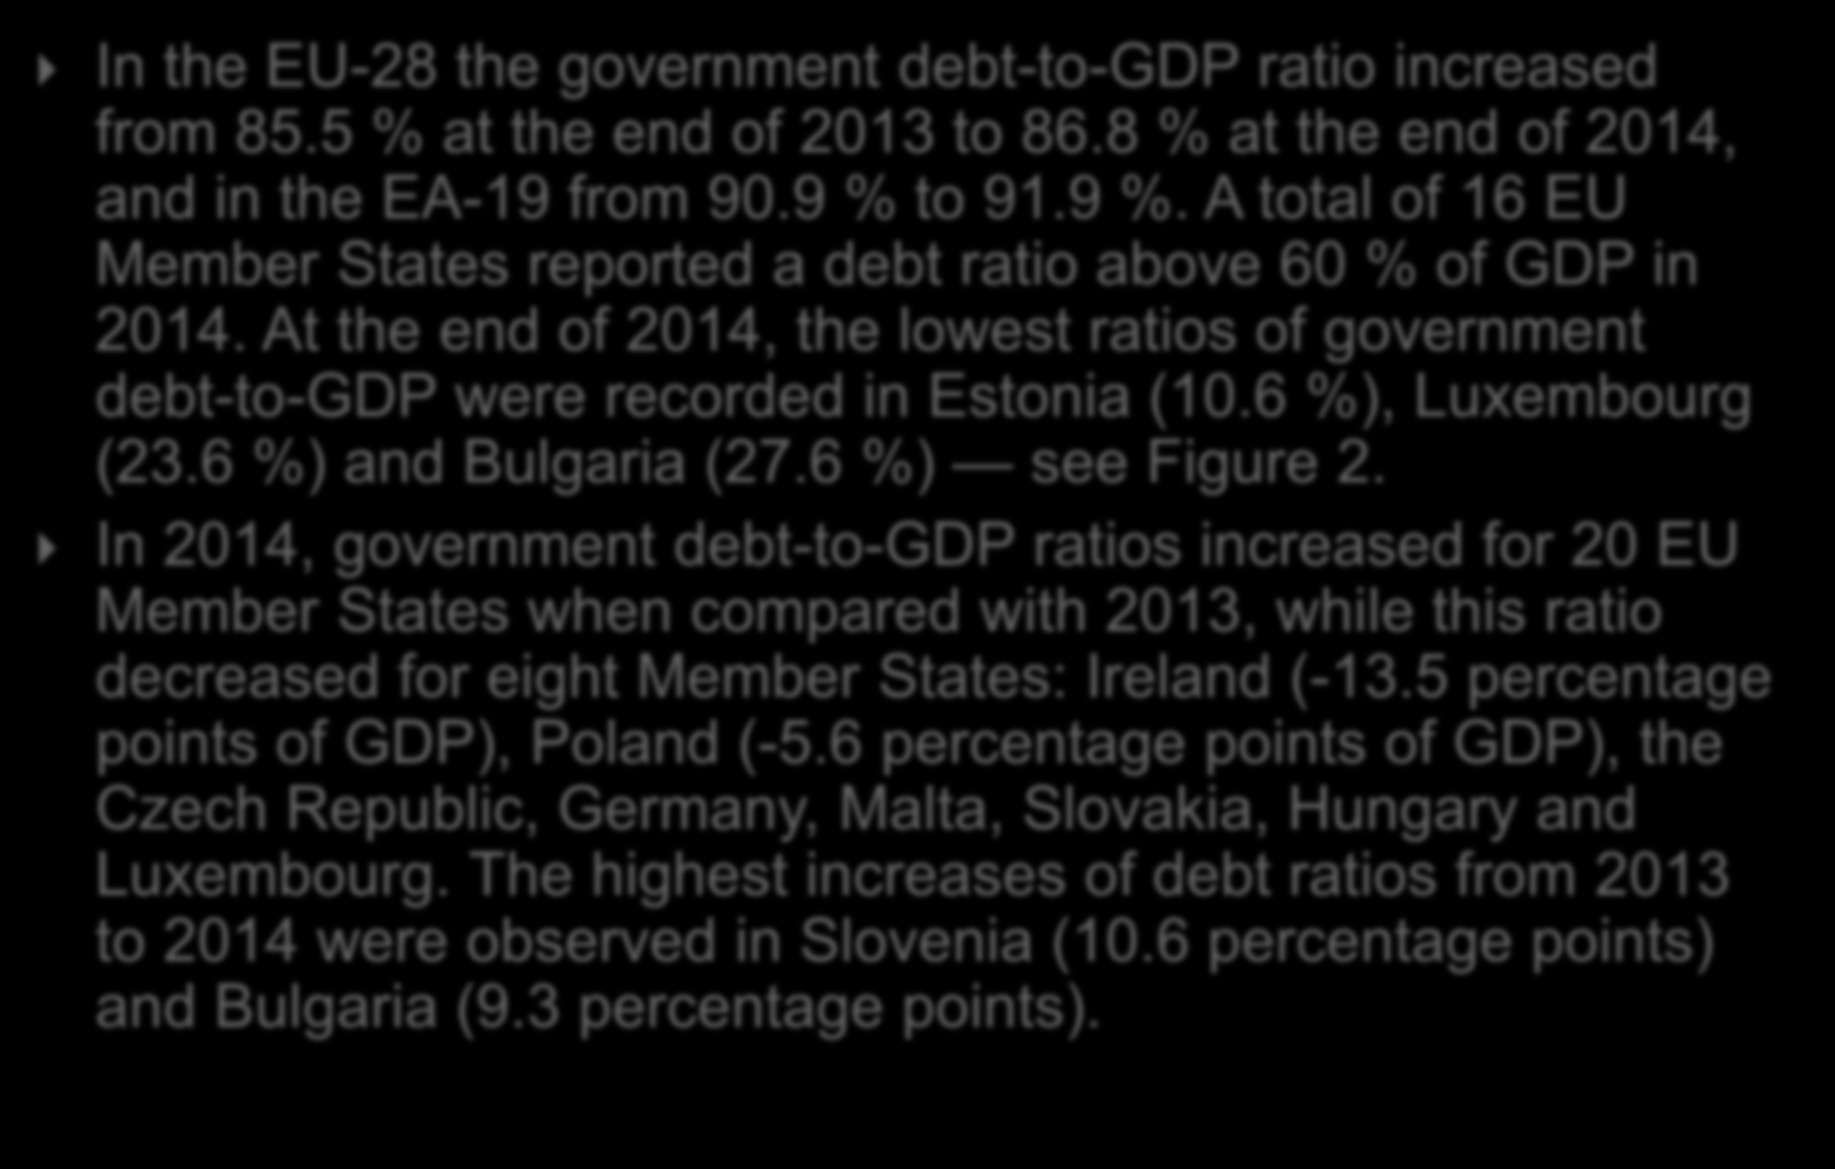 In the EU-28 the government debt-to-gdp ratio increased from 85.5 % at the end of 2013 to 86.8 % at the end of 2014, and in the EA-19 from 90.9 % 